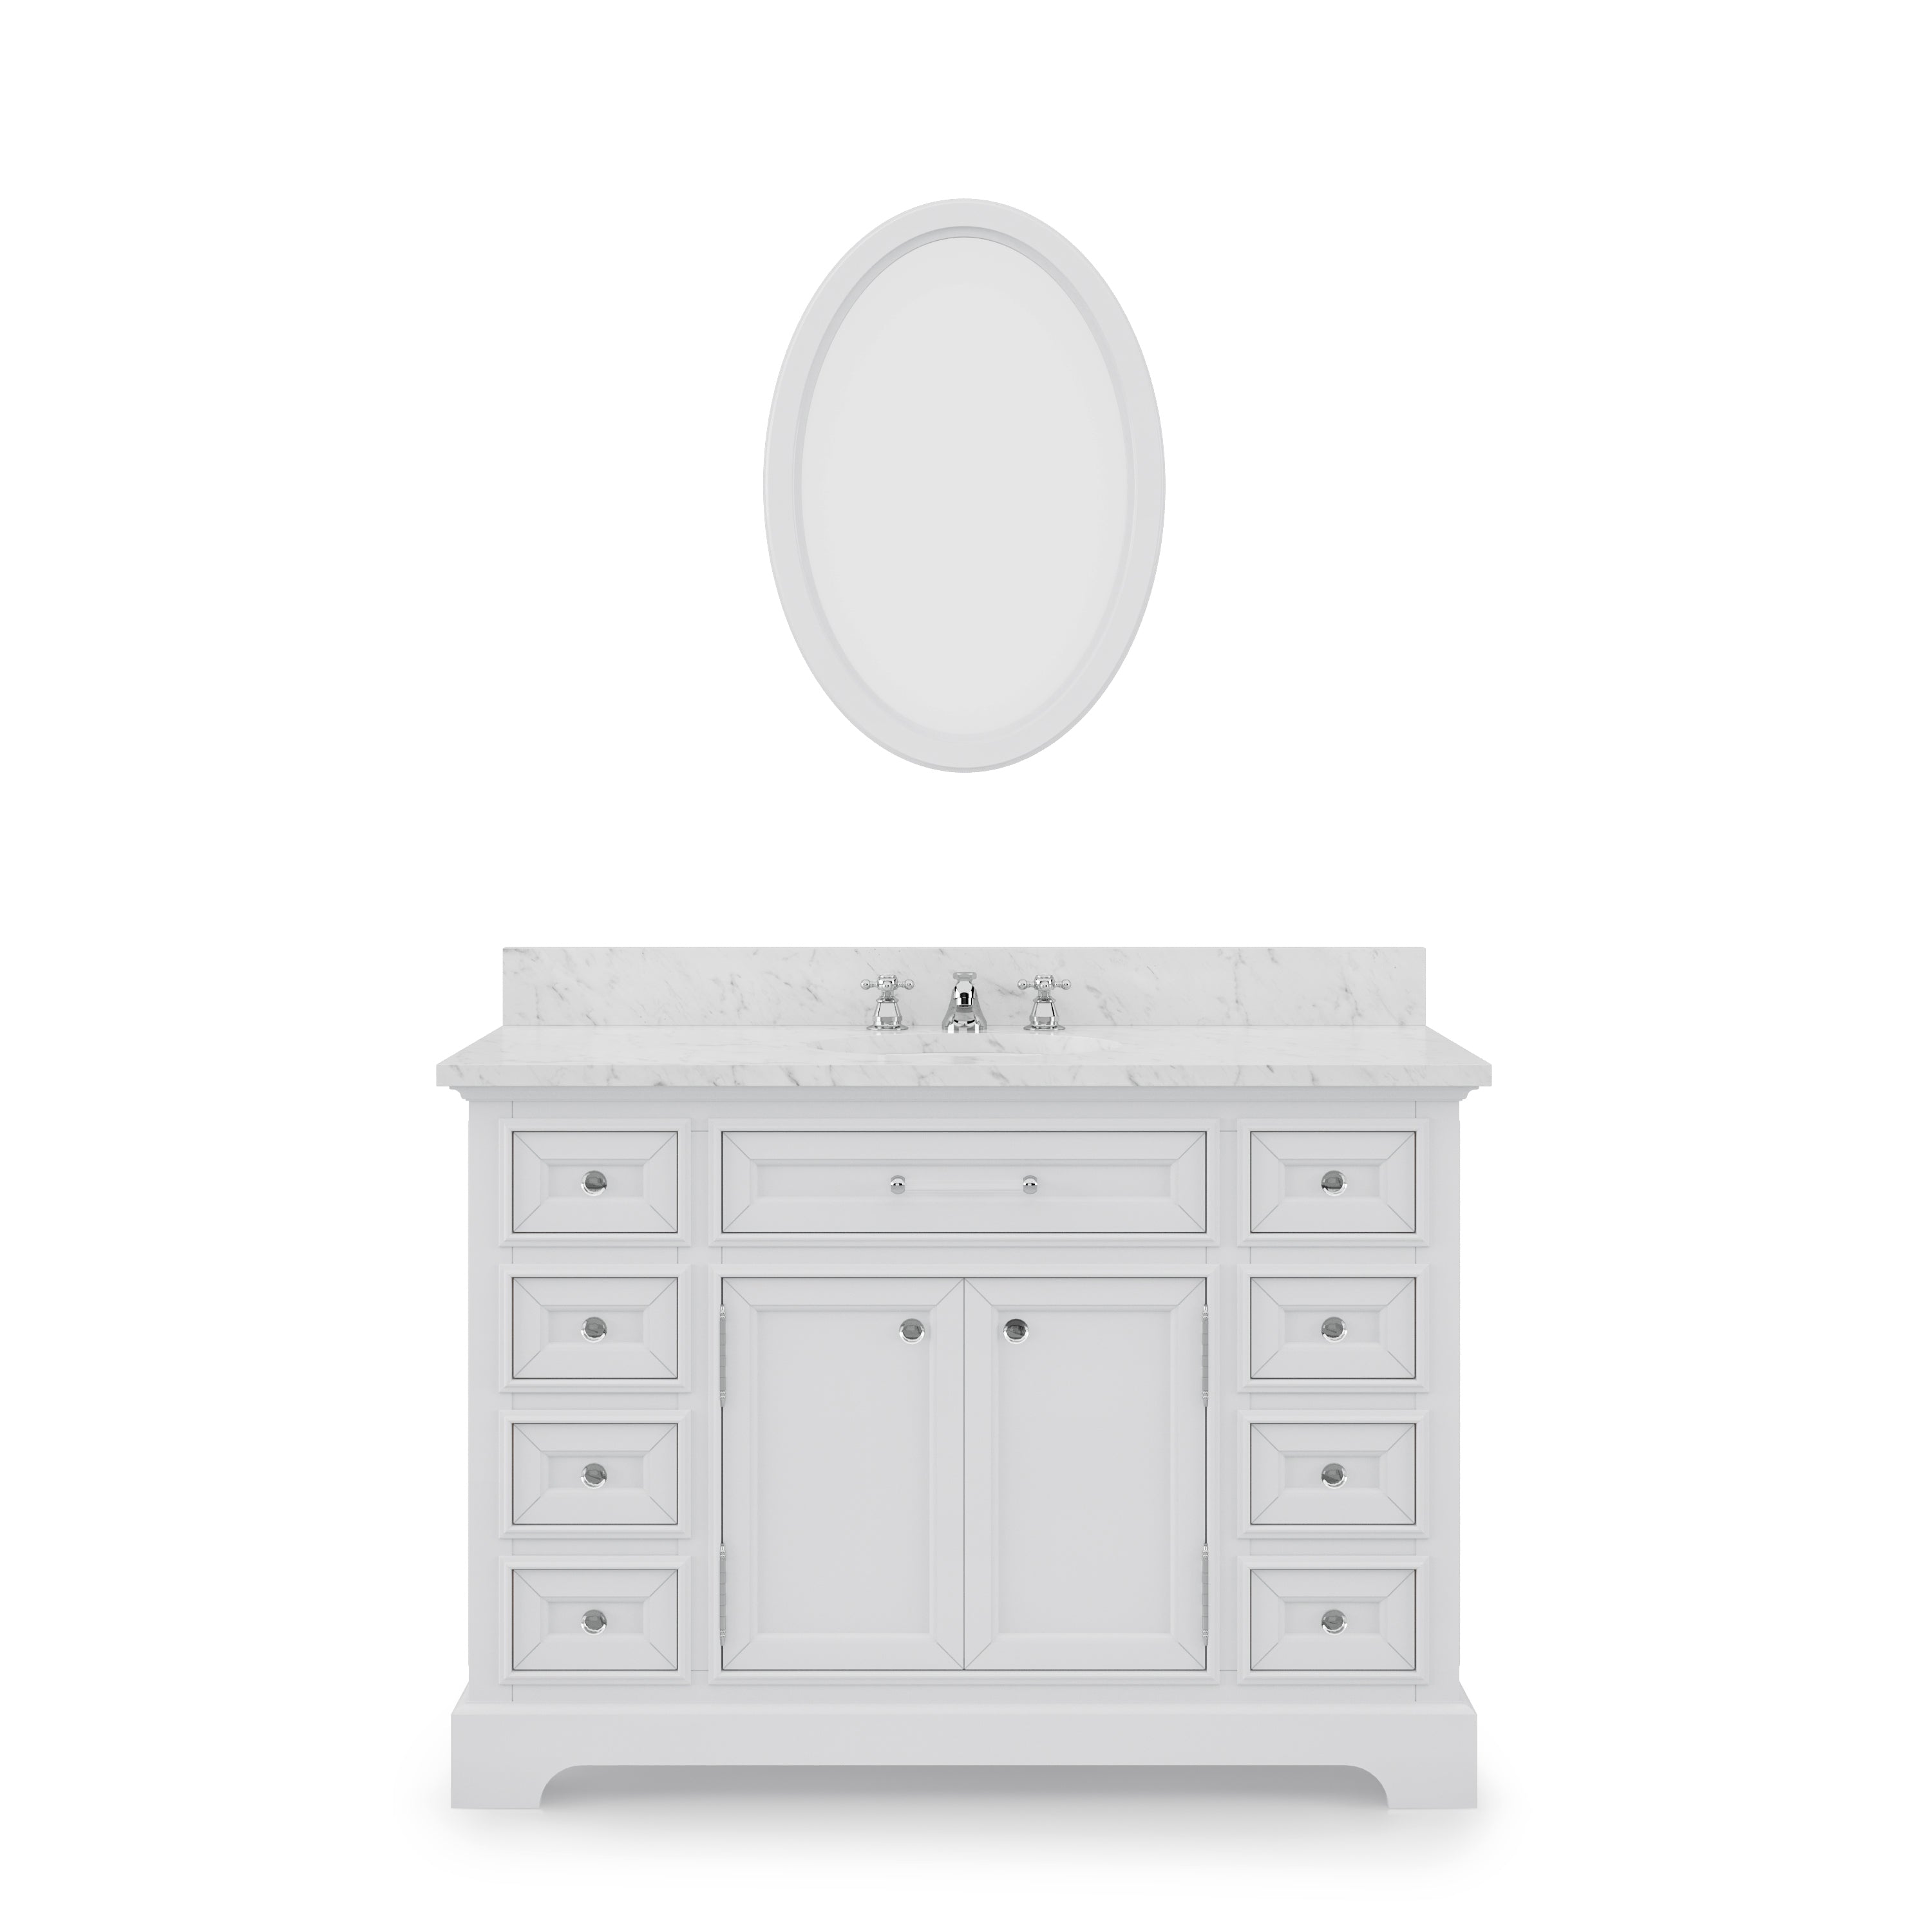 Water Creation | 48 Inch Pure White Single Sink Bathroom Vanity With Matching Framed Mirror And Faucet From The Derby Collection | DE48CW01PW-O24BX0901